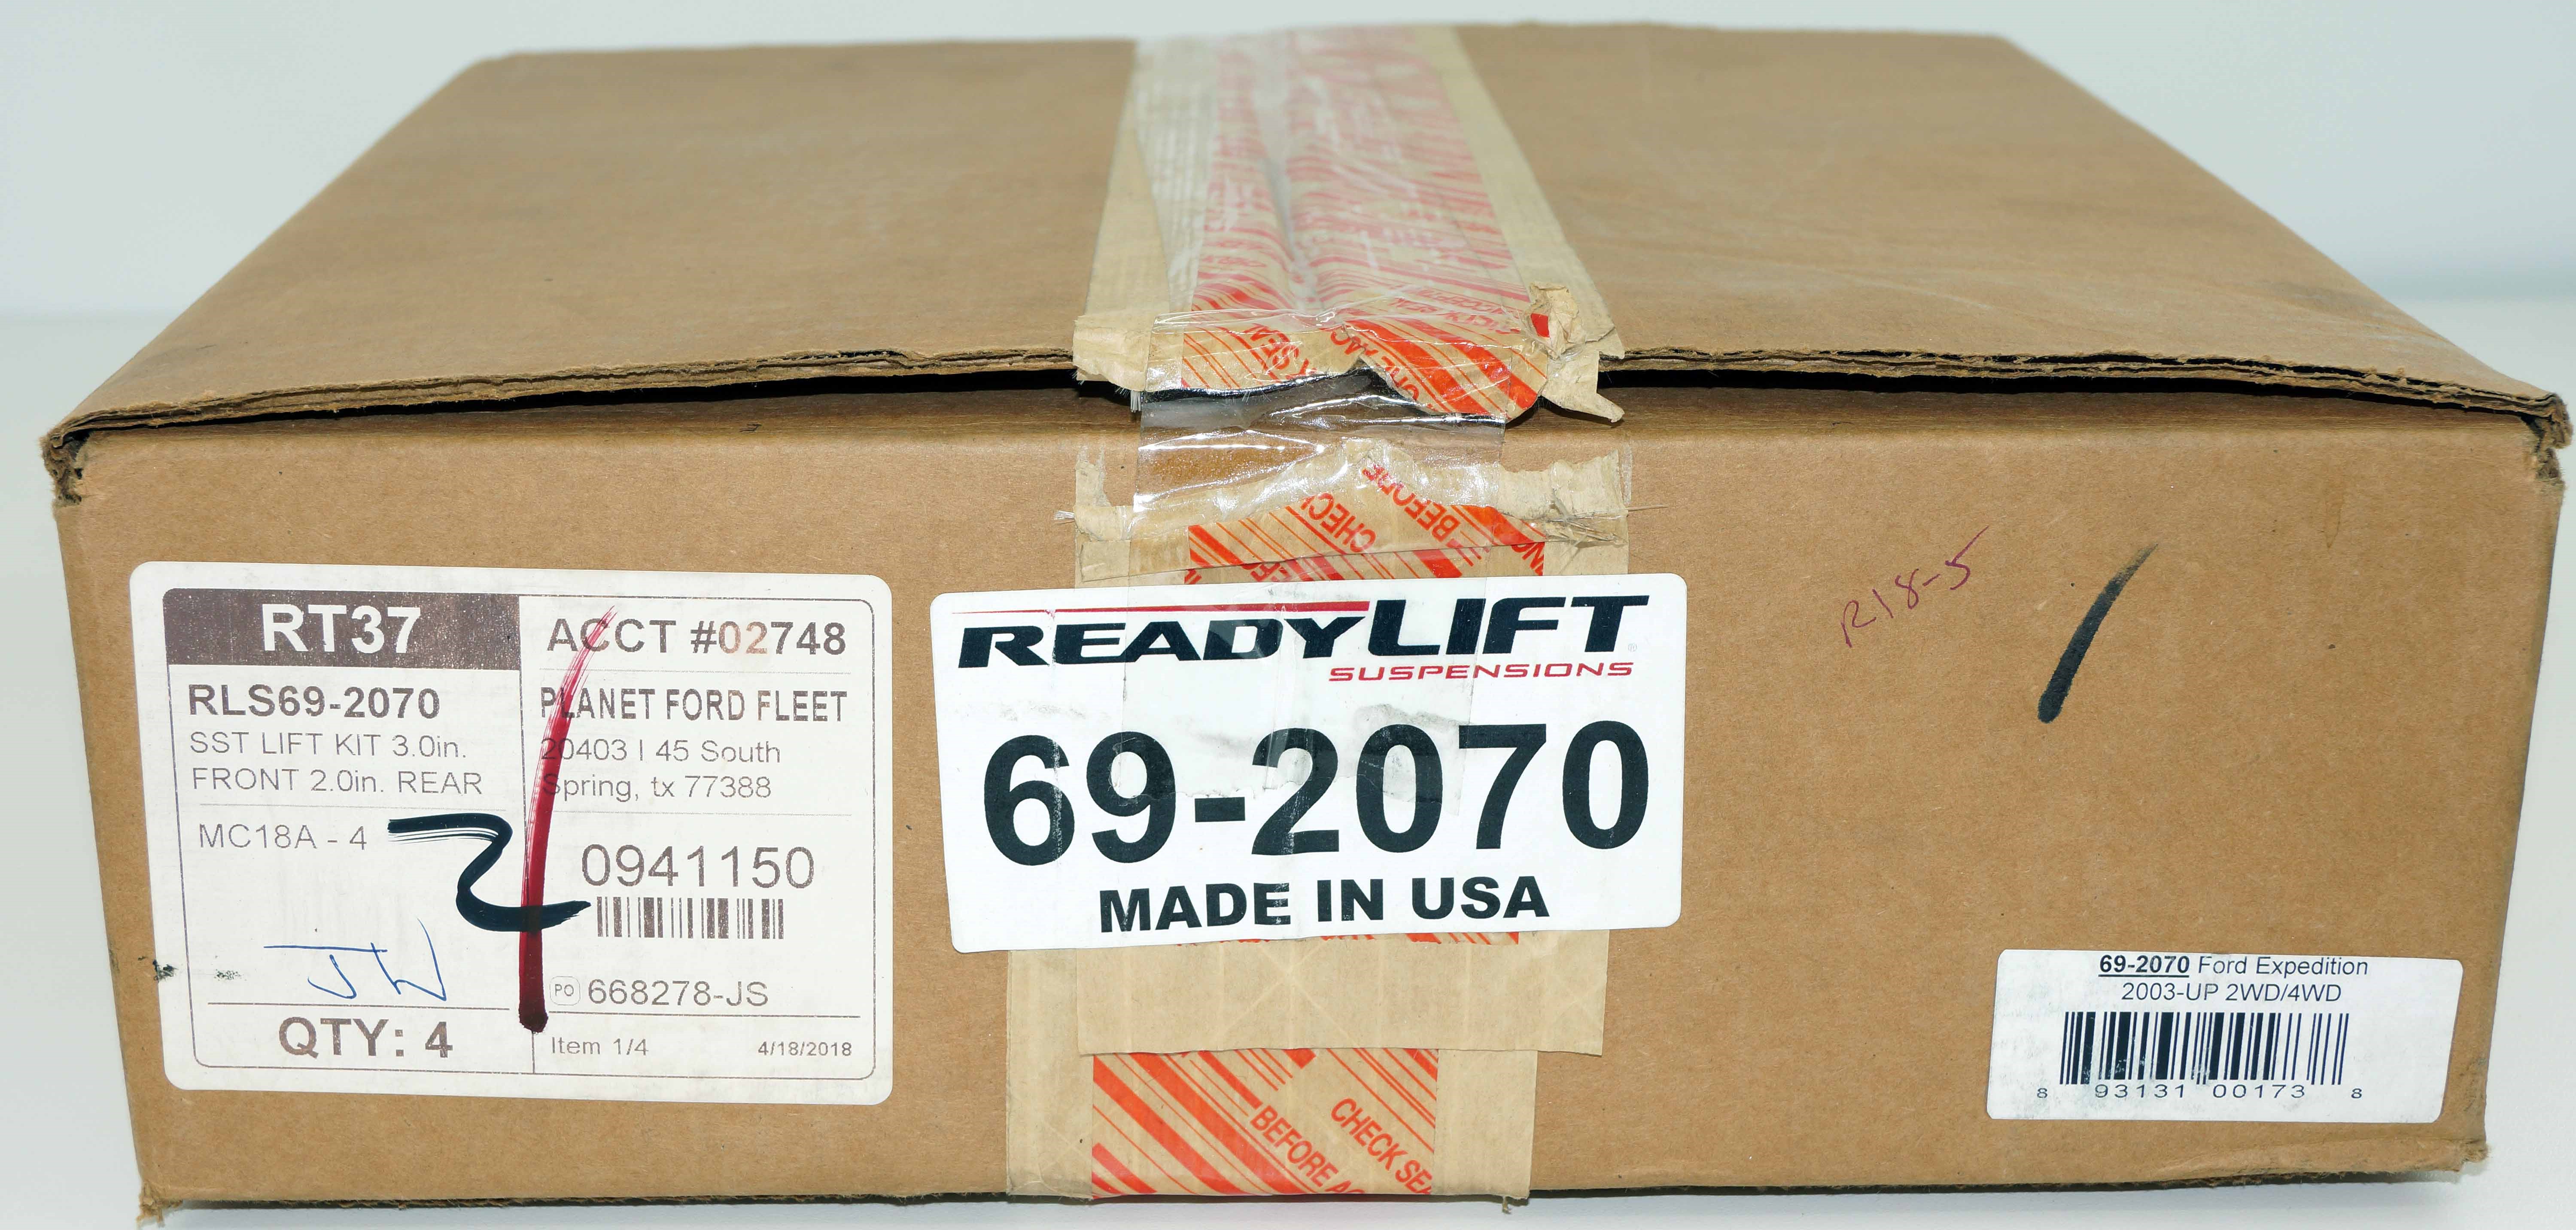 ReadyLIFT 69-2070 Leveling Lift Kit for 03-17 Ford 150 Expedition Navigator - image 2